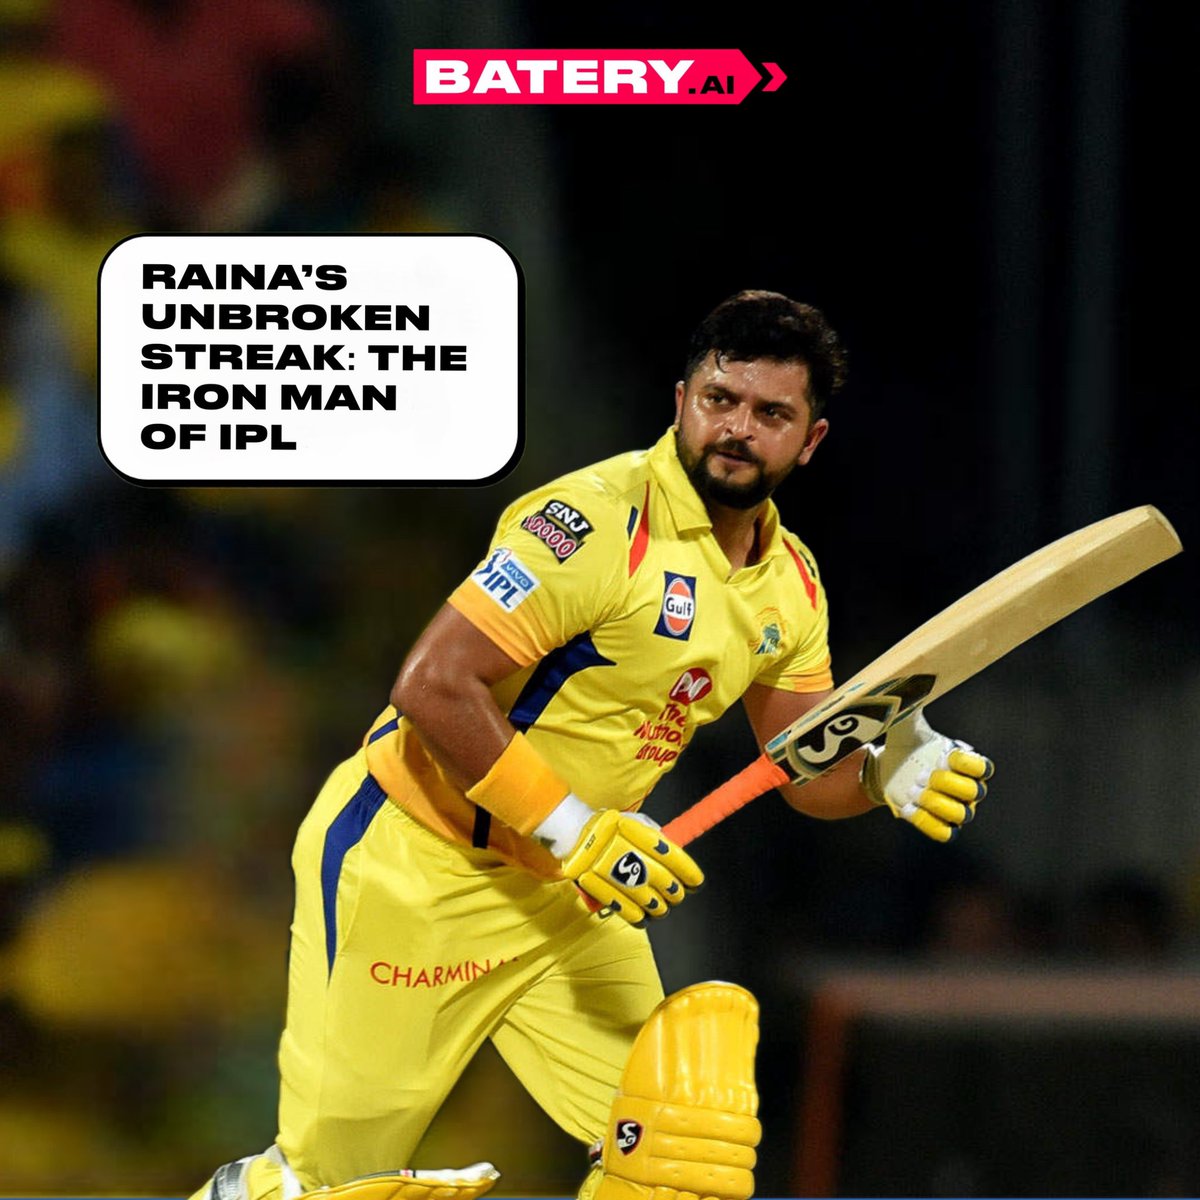 Suresh Raina’s incredible record of playing every match for the Chennai Super Kings from the IPL’s start in 2008 until 2018 showcases his durability and consistency 🏏 The left-handed batsman played a crucial role in CSK’s many victories, solidifying his status as an IPL legend